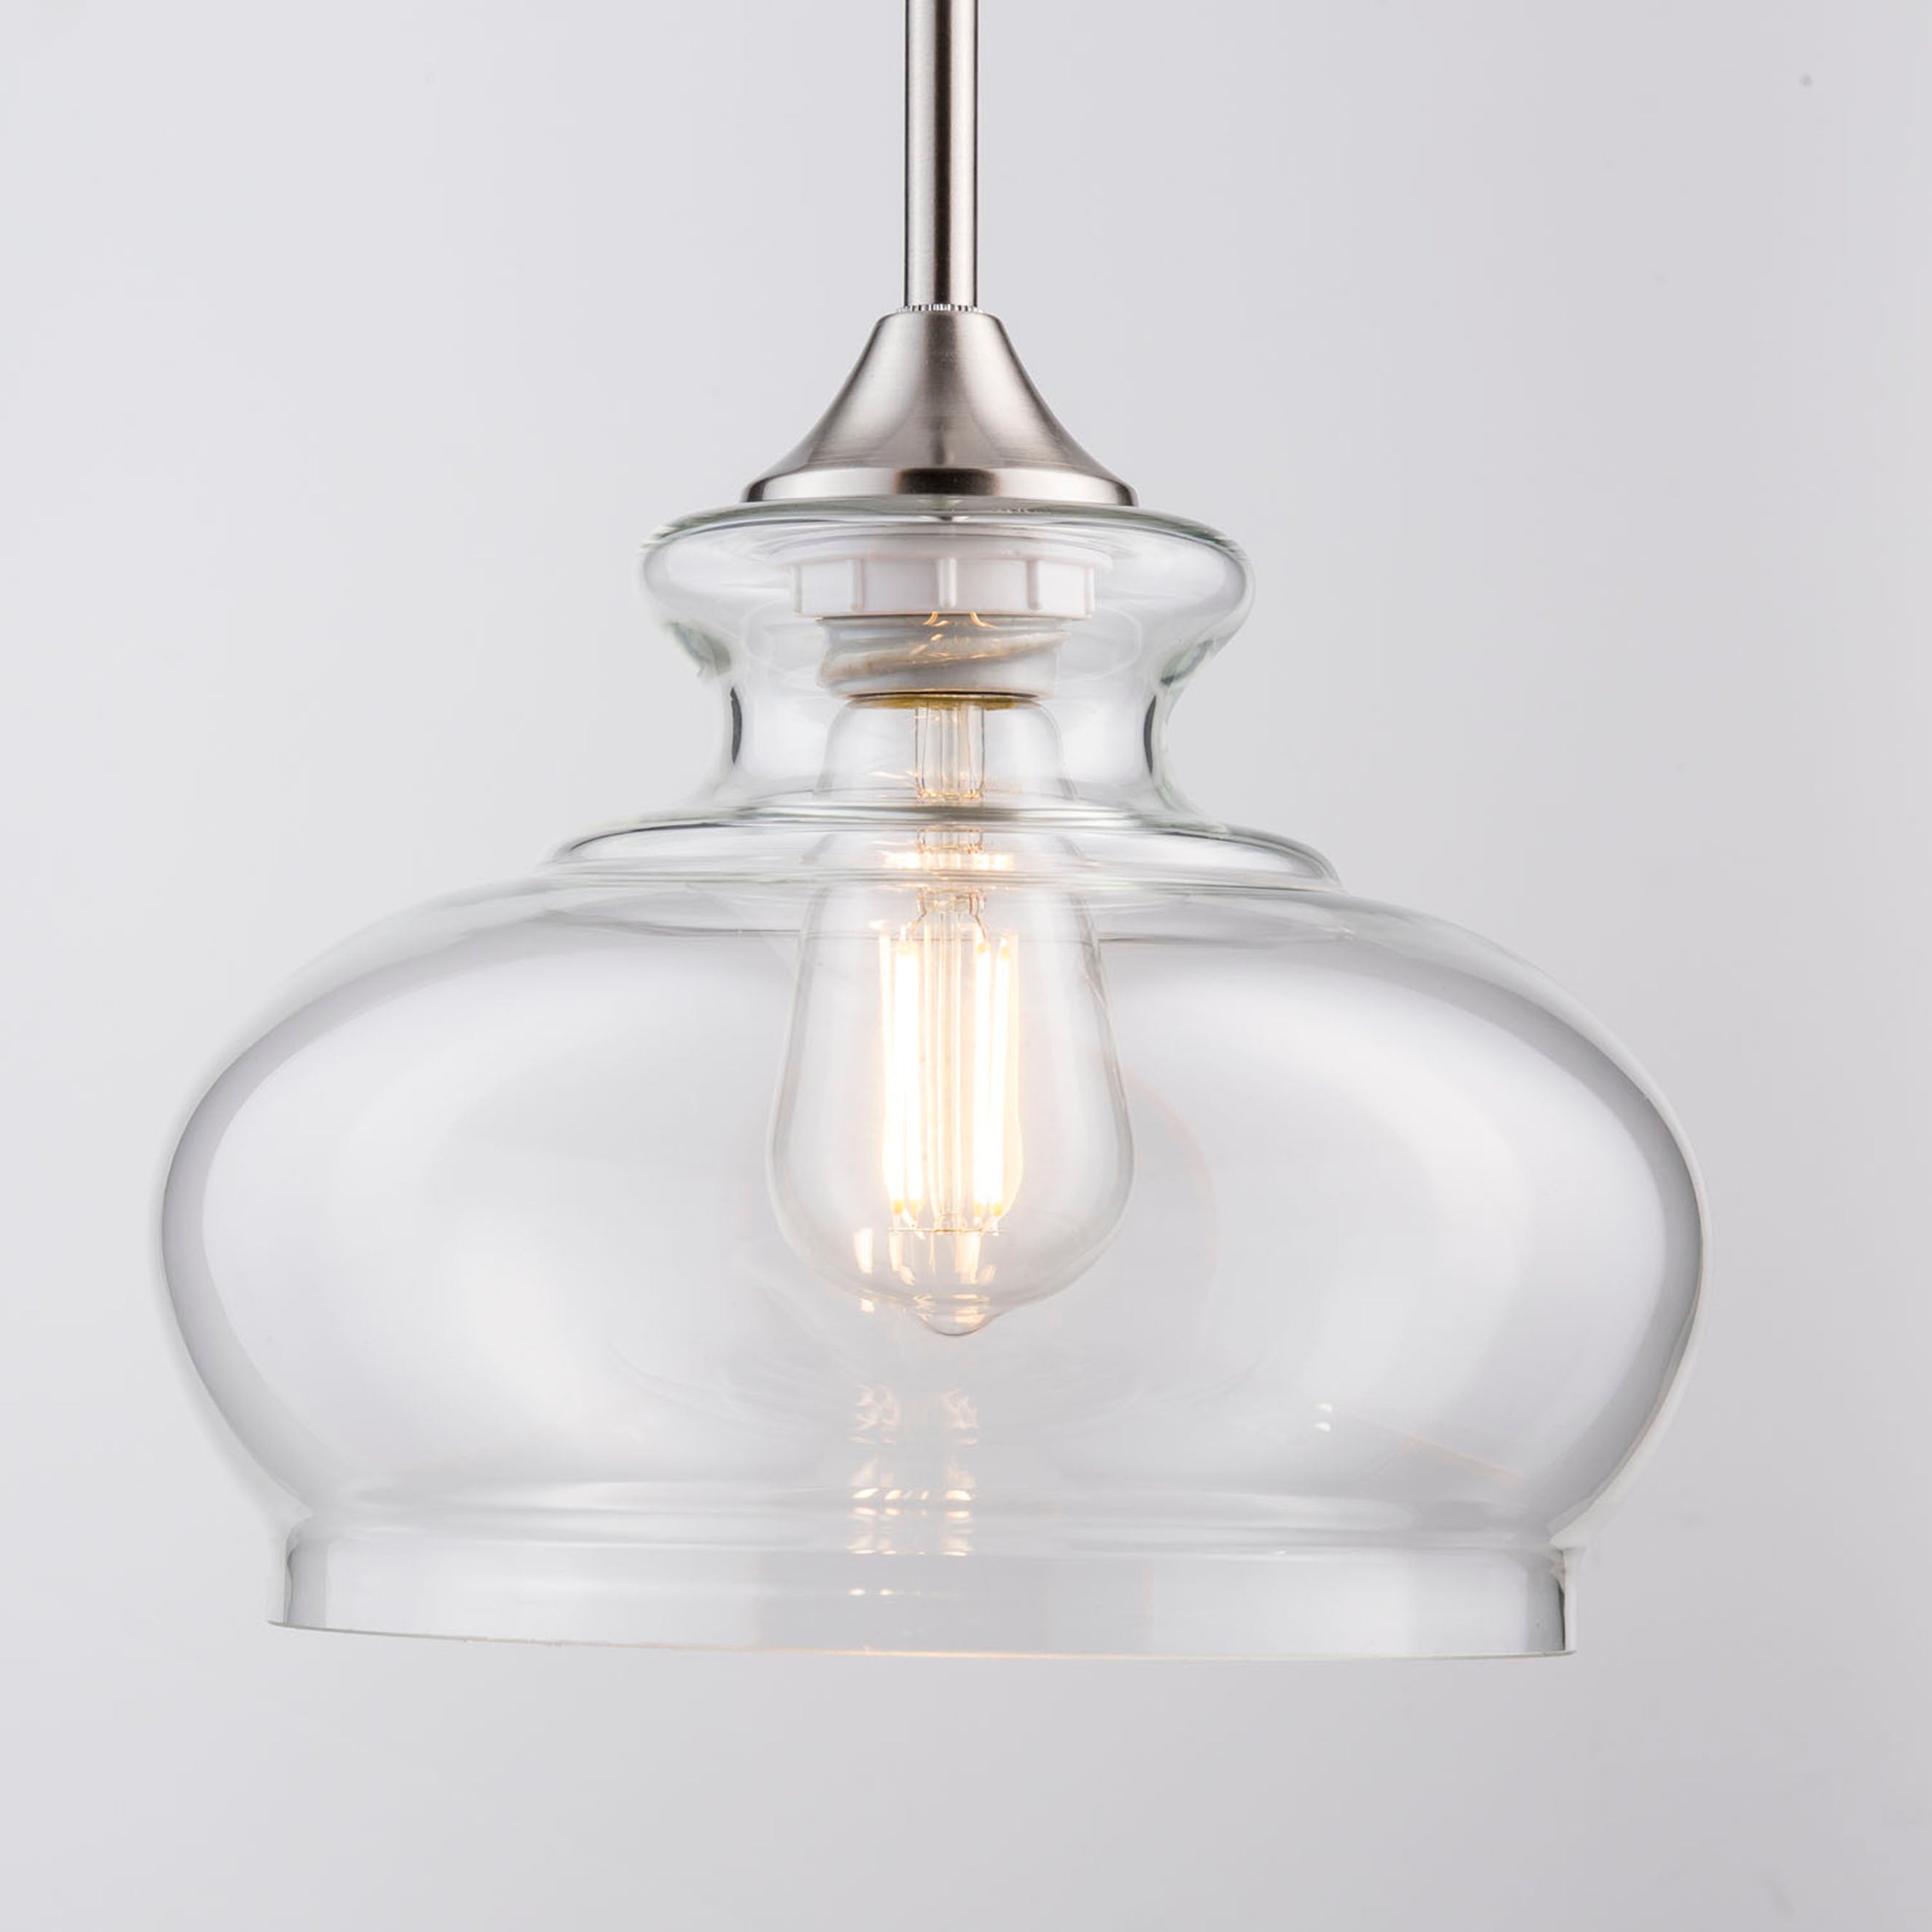 Ariella Ovale Lighting Affordable Residential included Linea | Pendant | Light, and LED Modern bulb Lighting